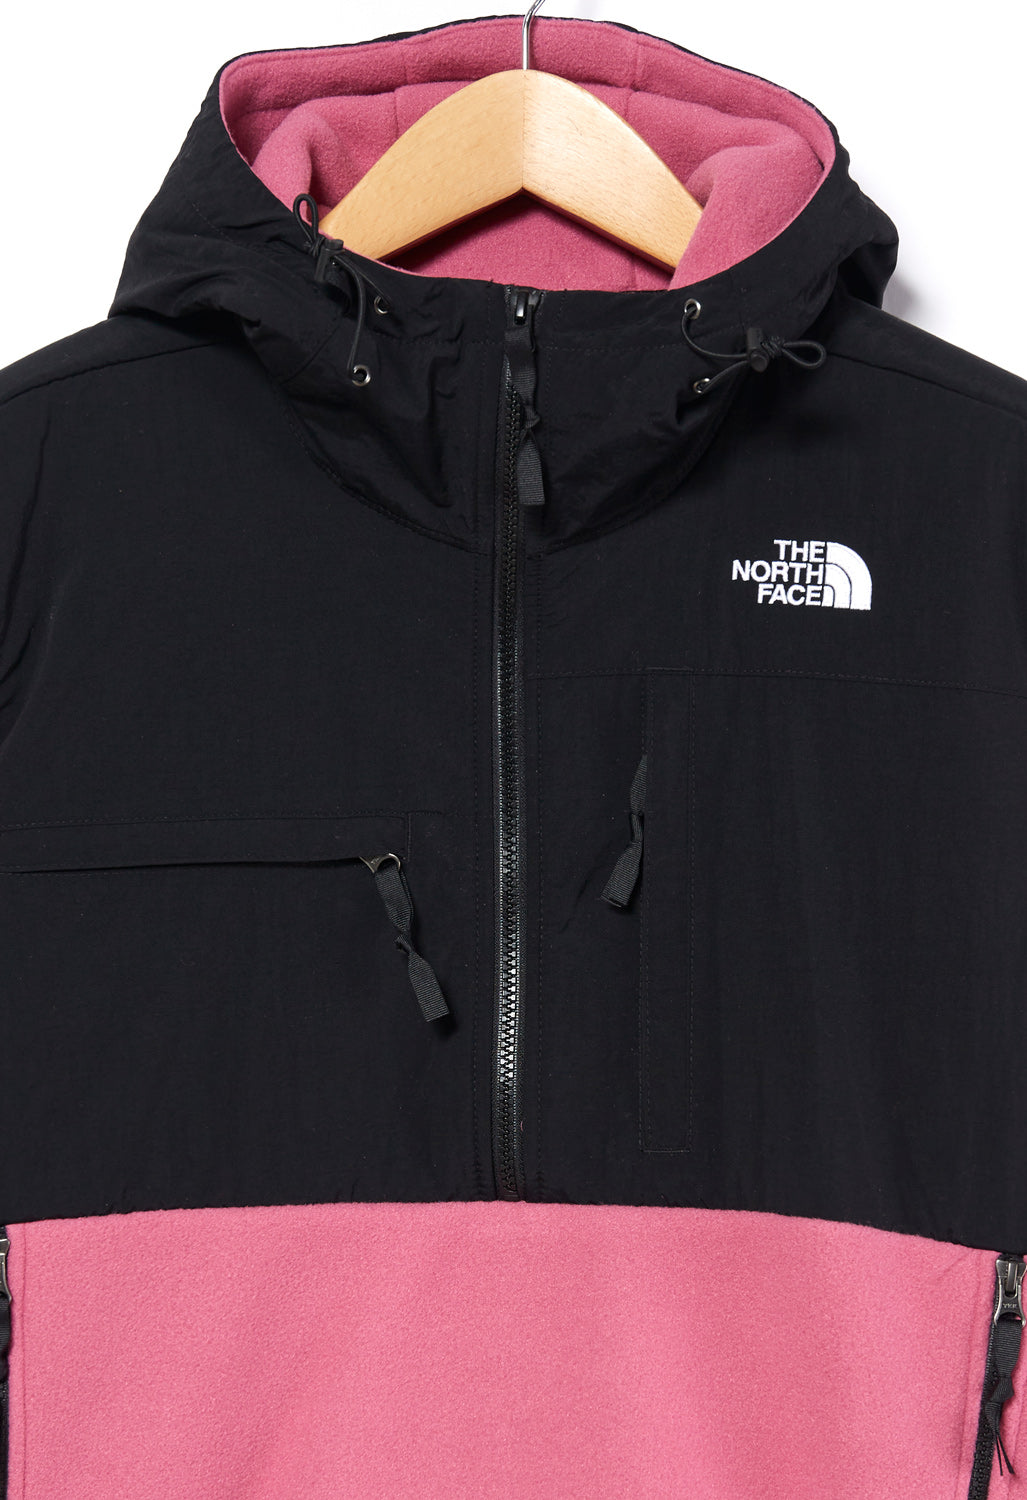 The North Face Denali Men's Anorak - Red Violet